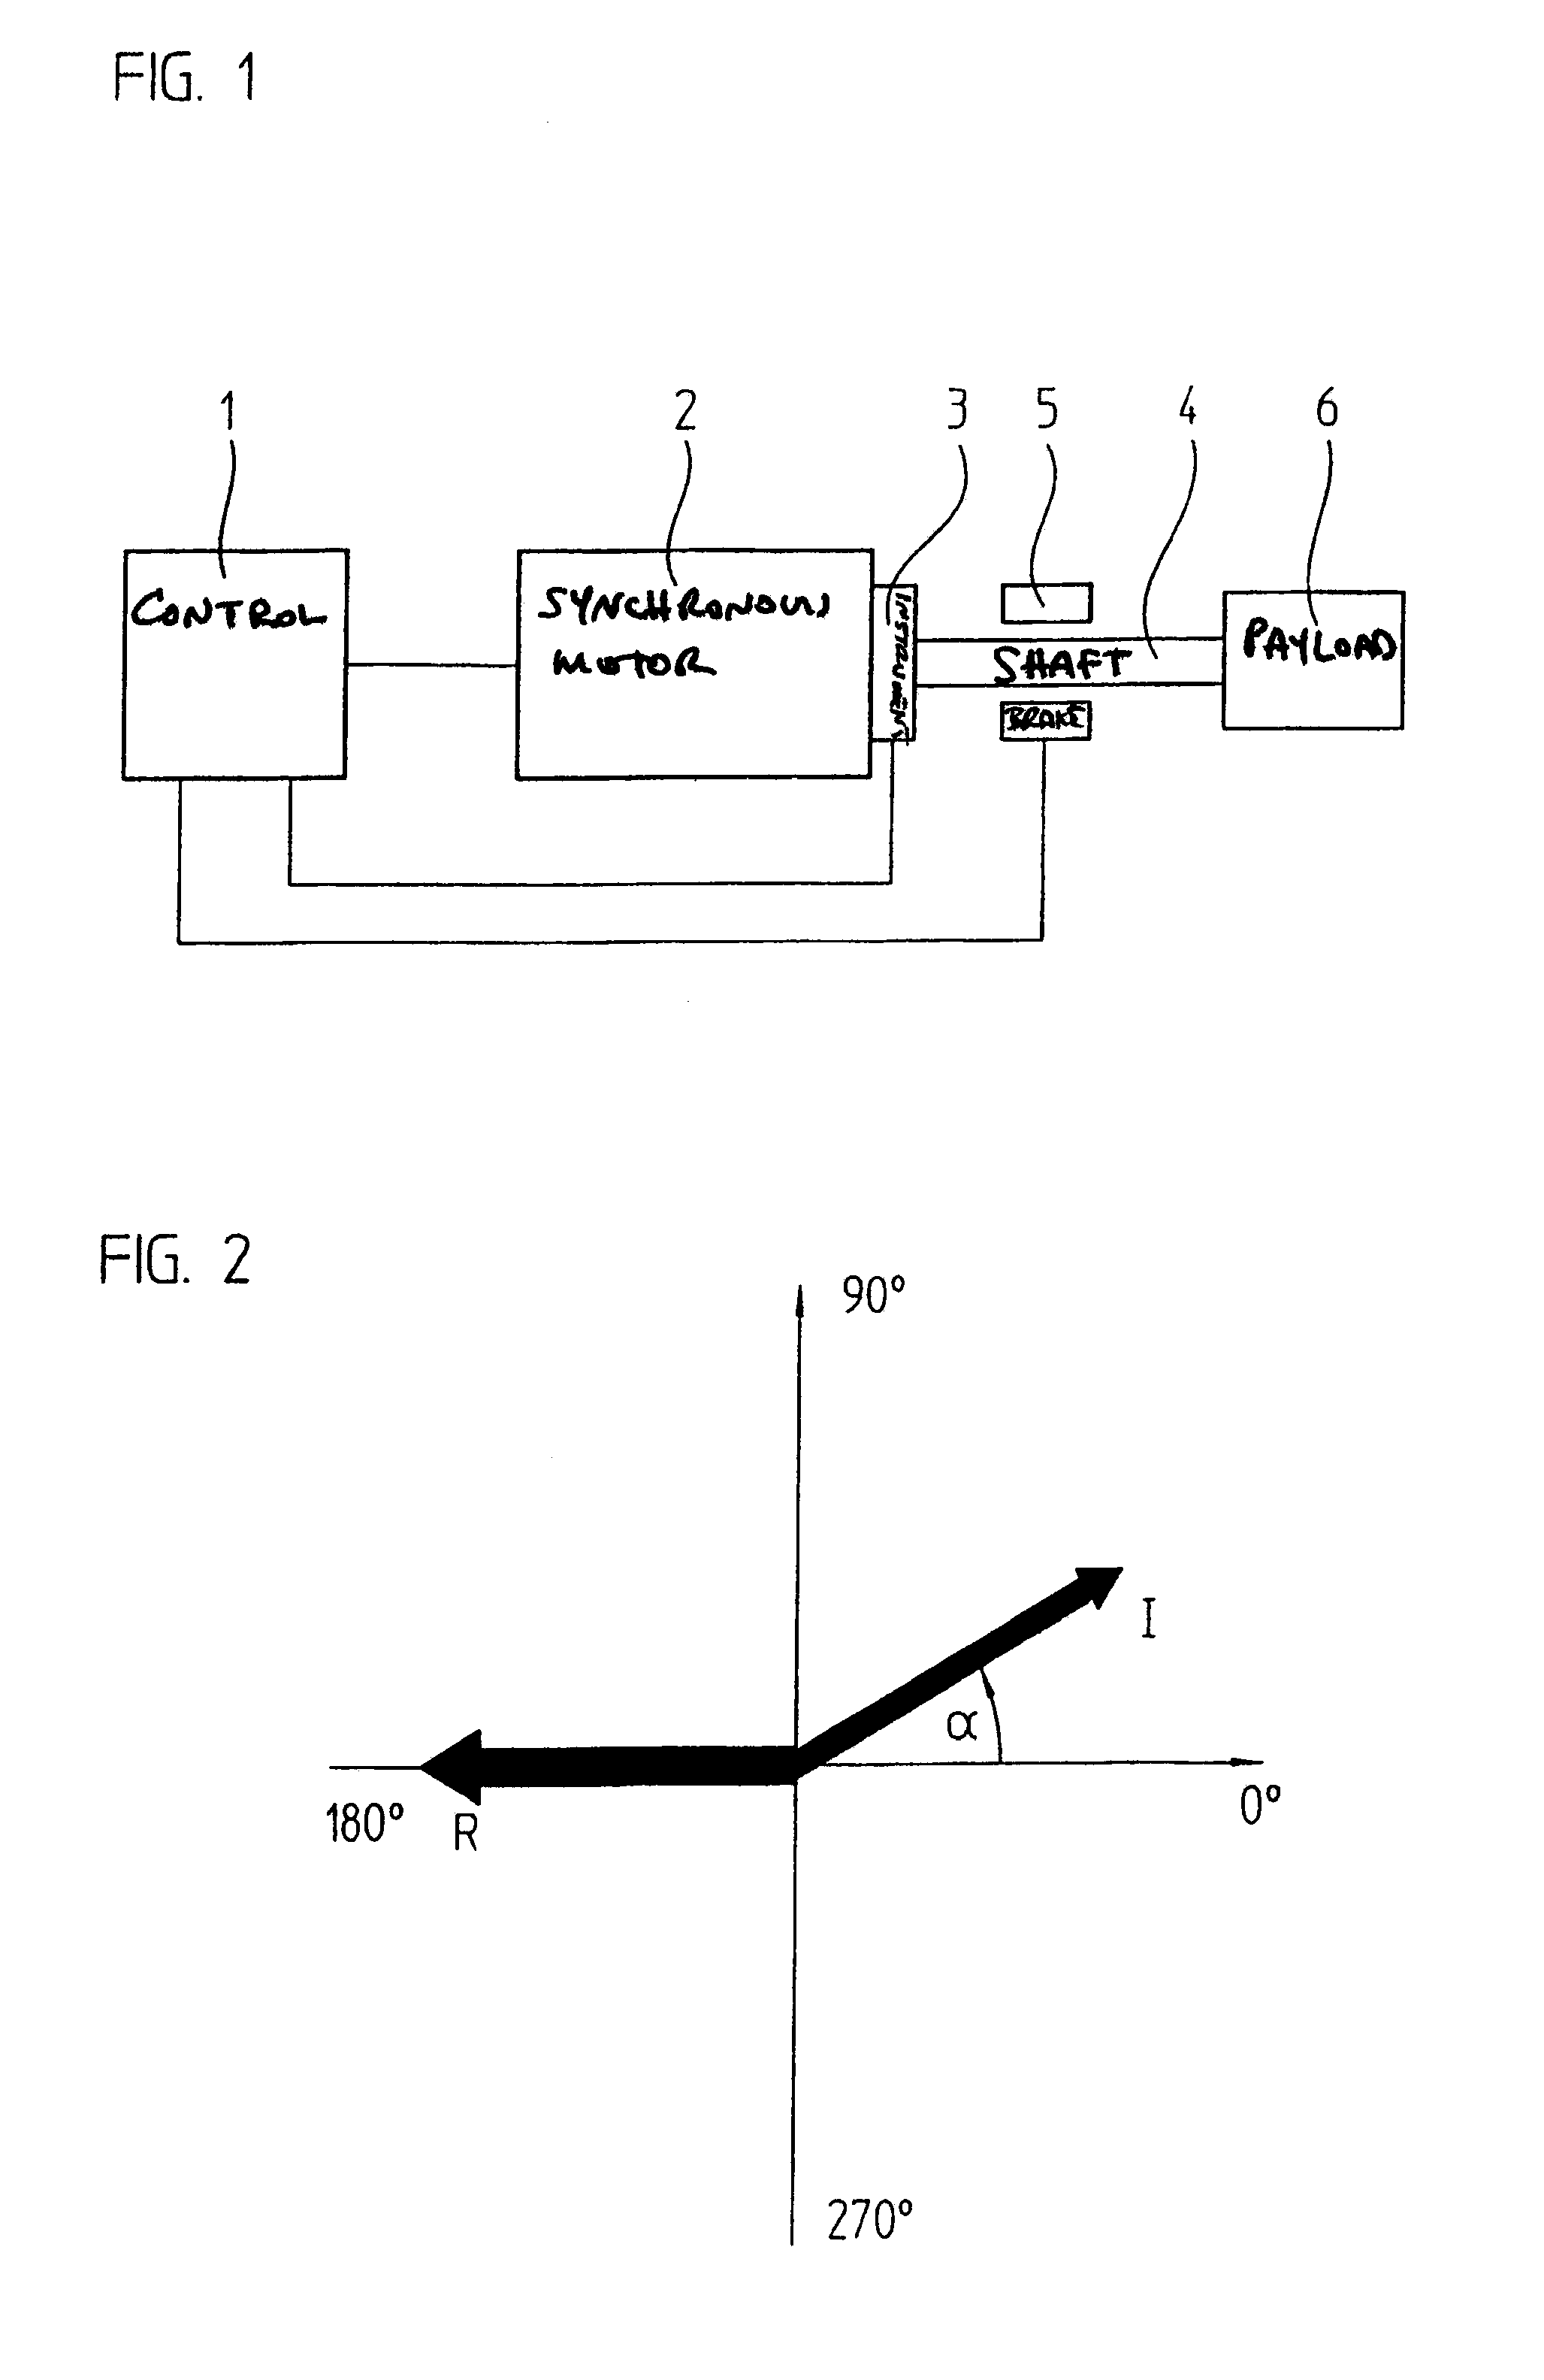 Method for determining the rotor position of a synchronous motor